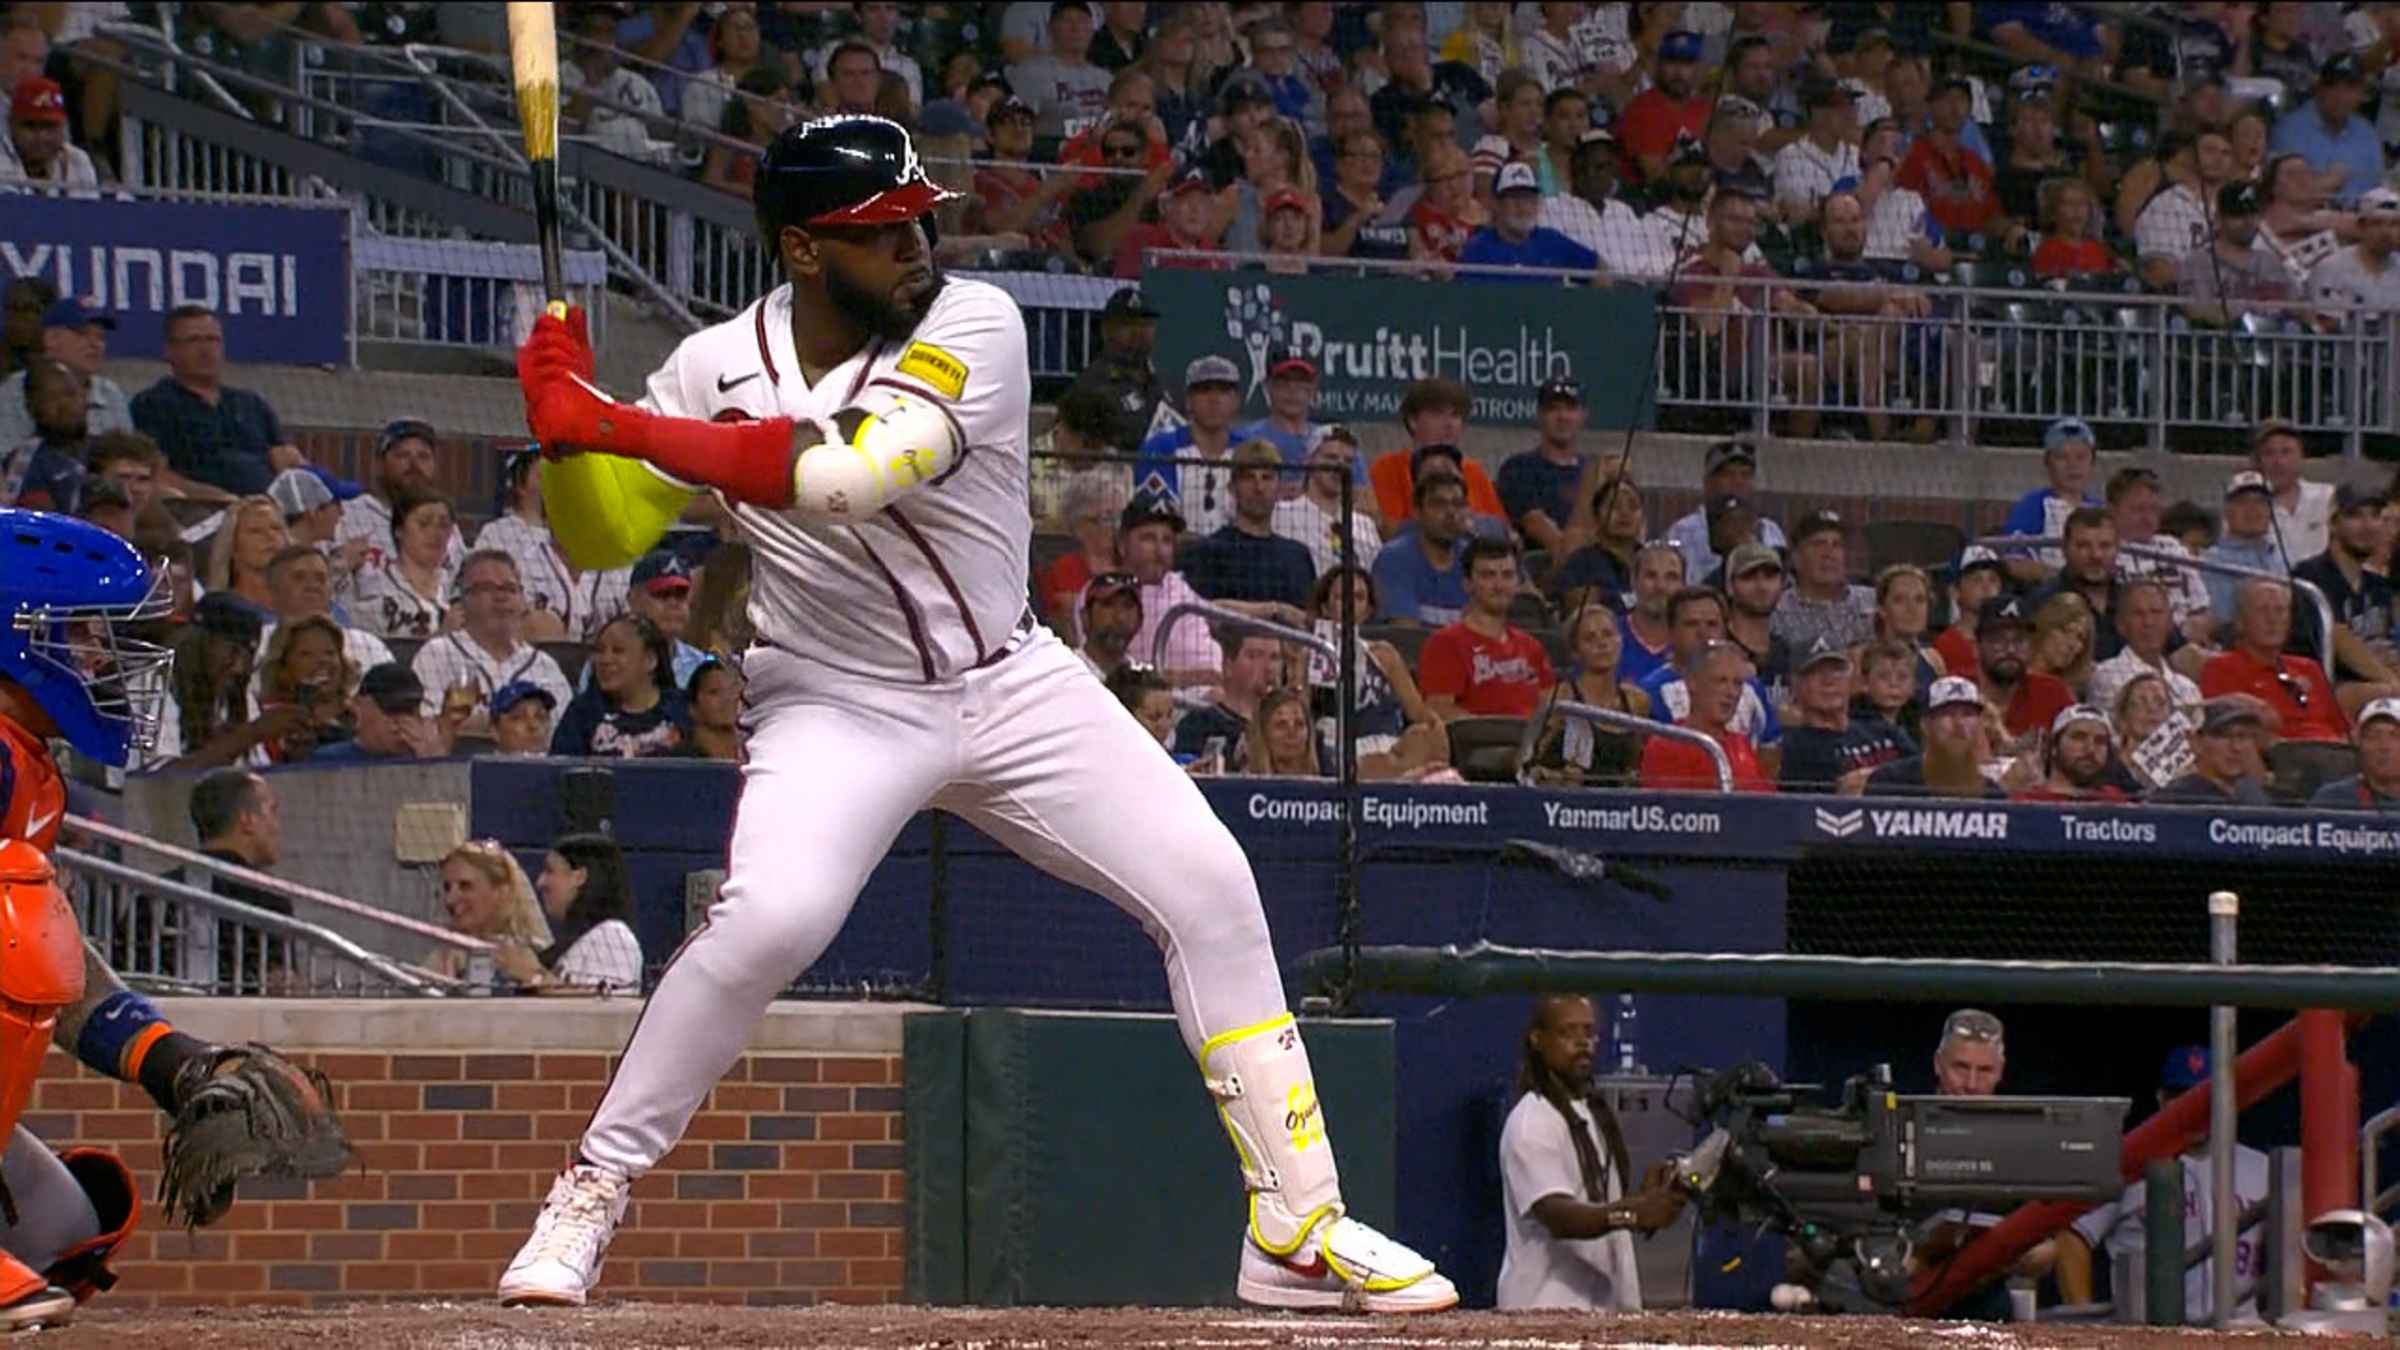 Marcell Ozuna 37th Home Run of the Season #Braves #MLB Distance: 413ft Exit  Velocity: 112 MPH Launch Angle: 39° Pitch: 91mph Four-Seam…